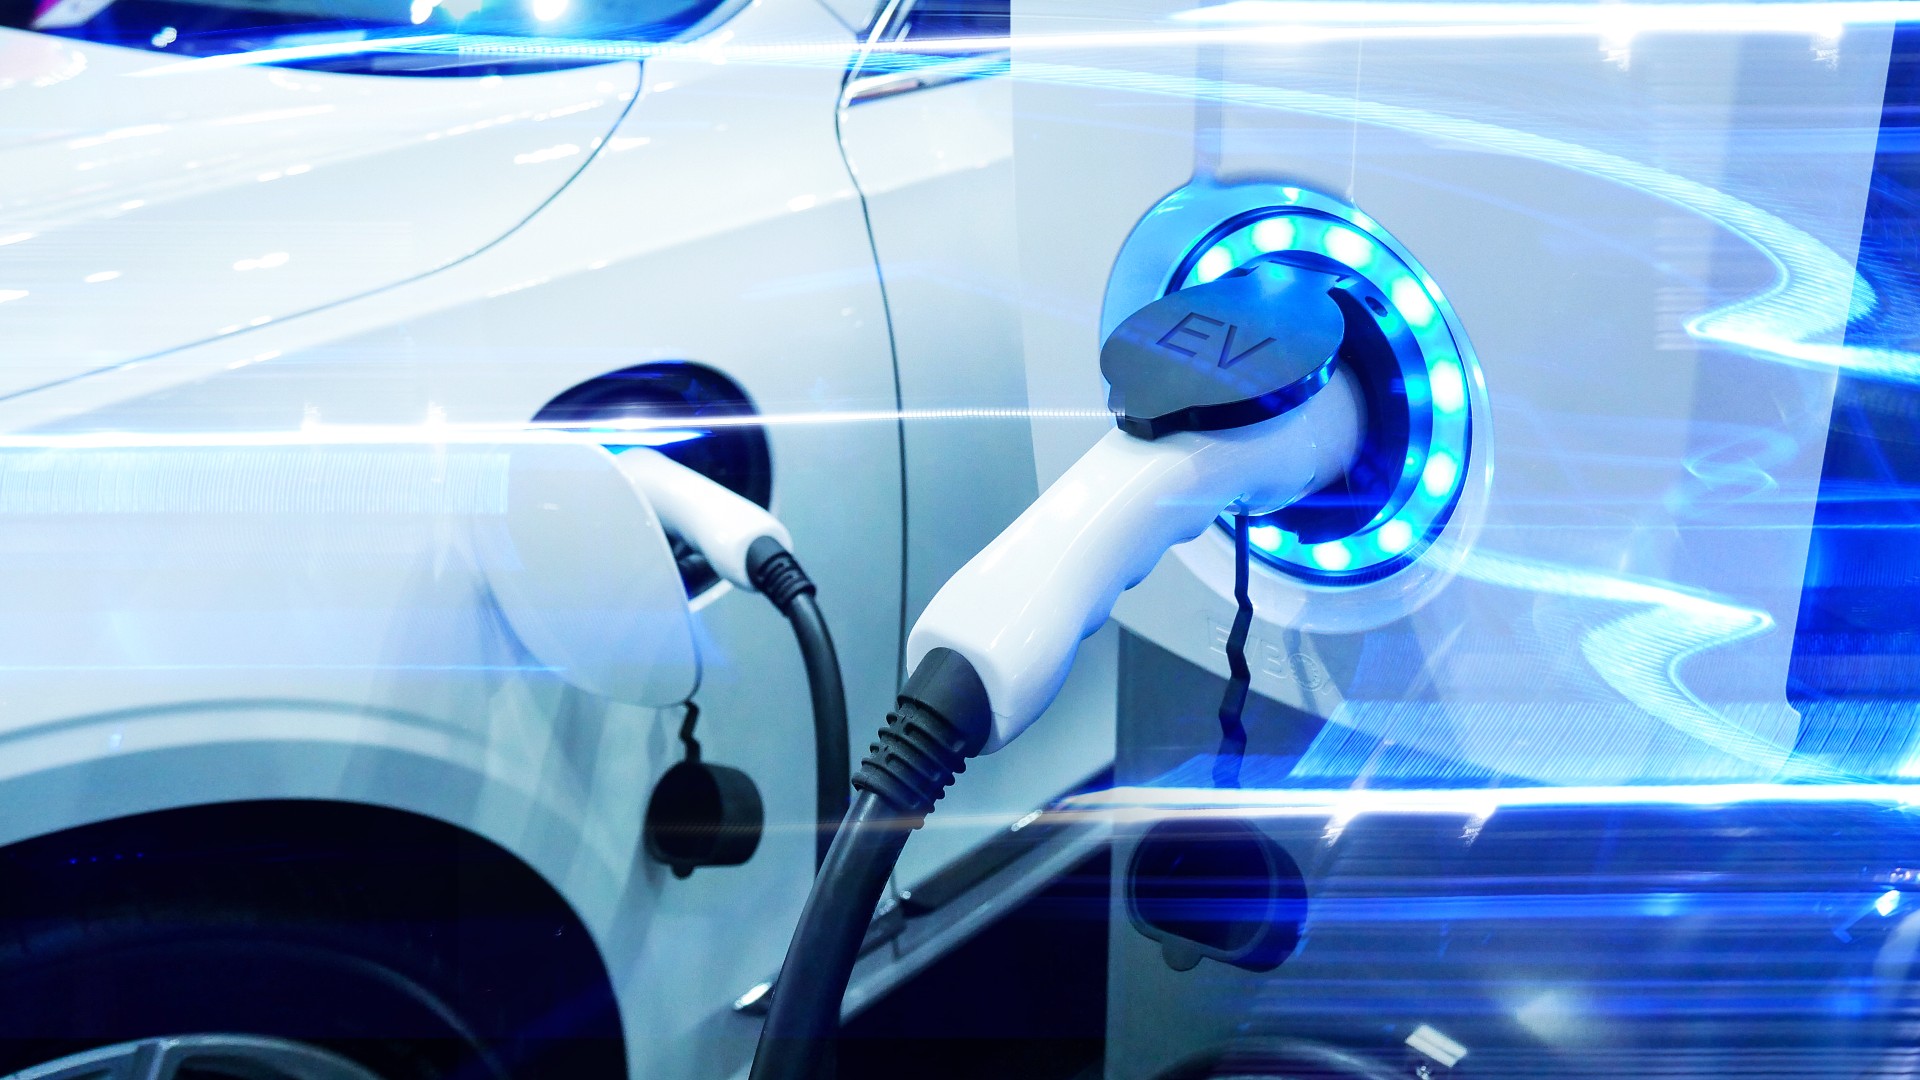 Policy roadmap for electric vehicles in India